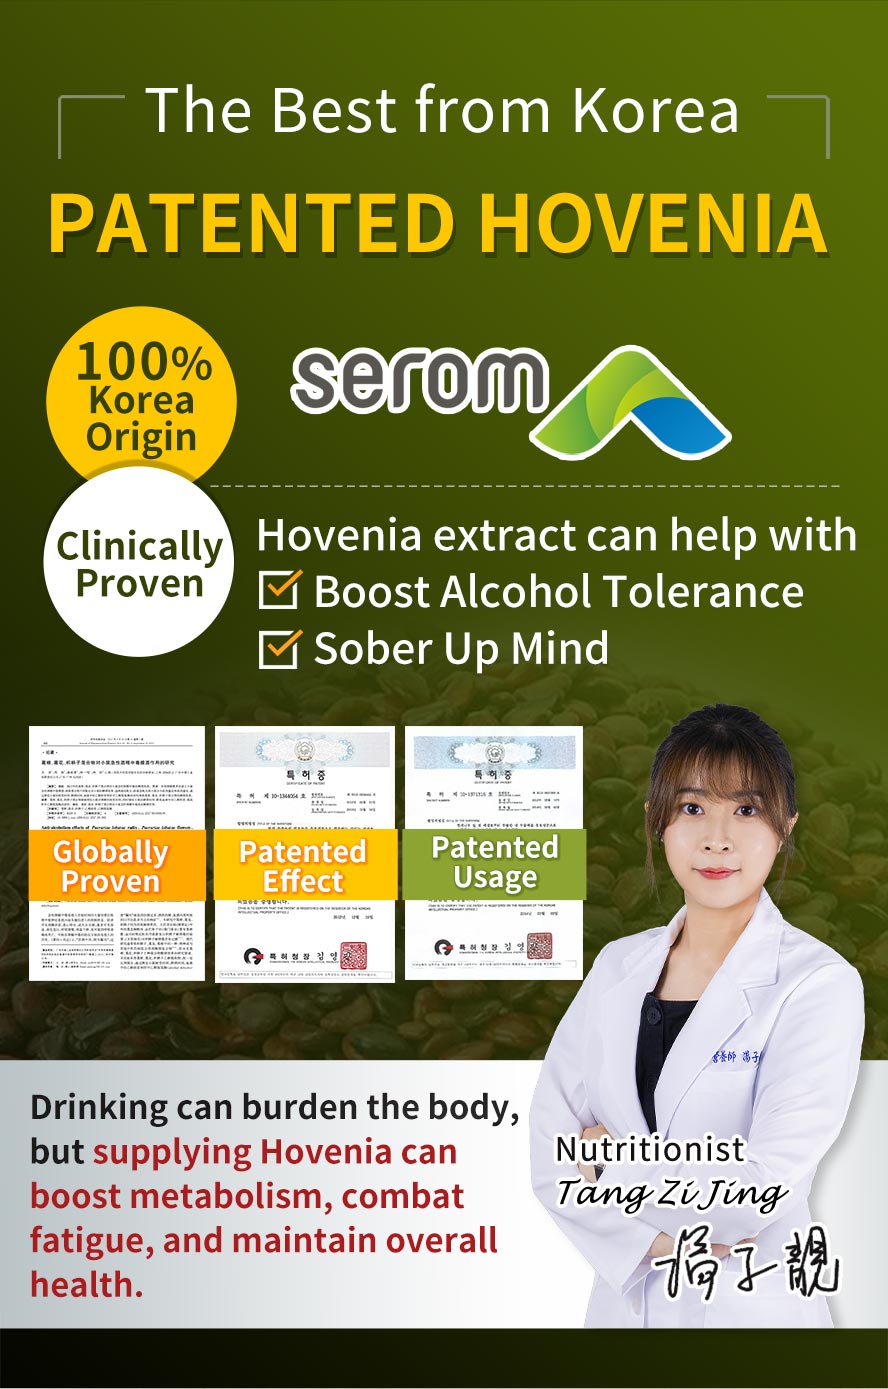 Patented hovenia has clinically proven can effectively sober up mind and promote good drinking tolerance which recommended by nutritionist